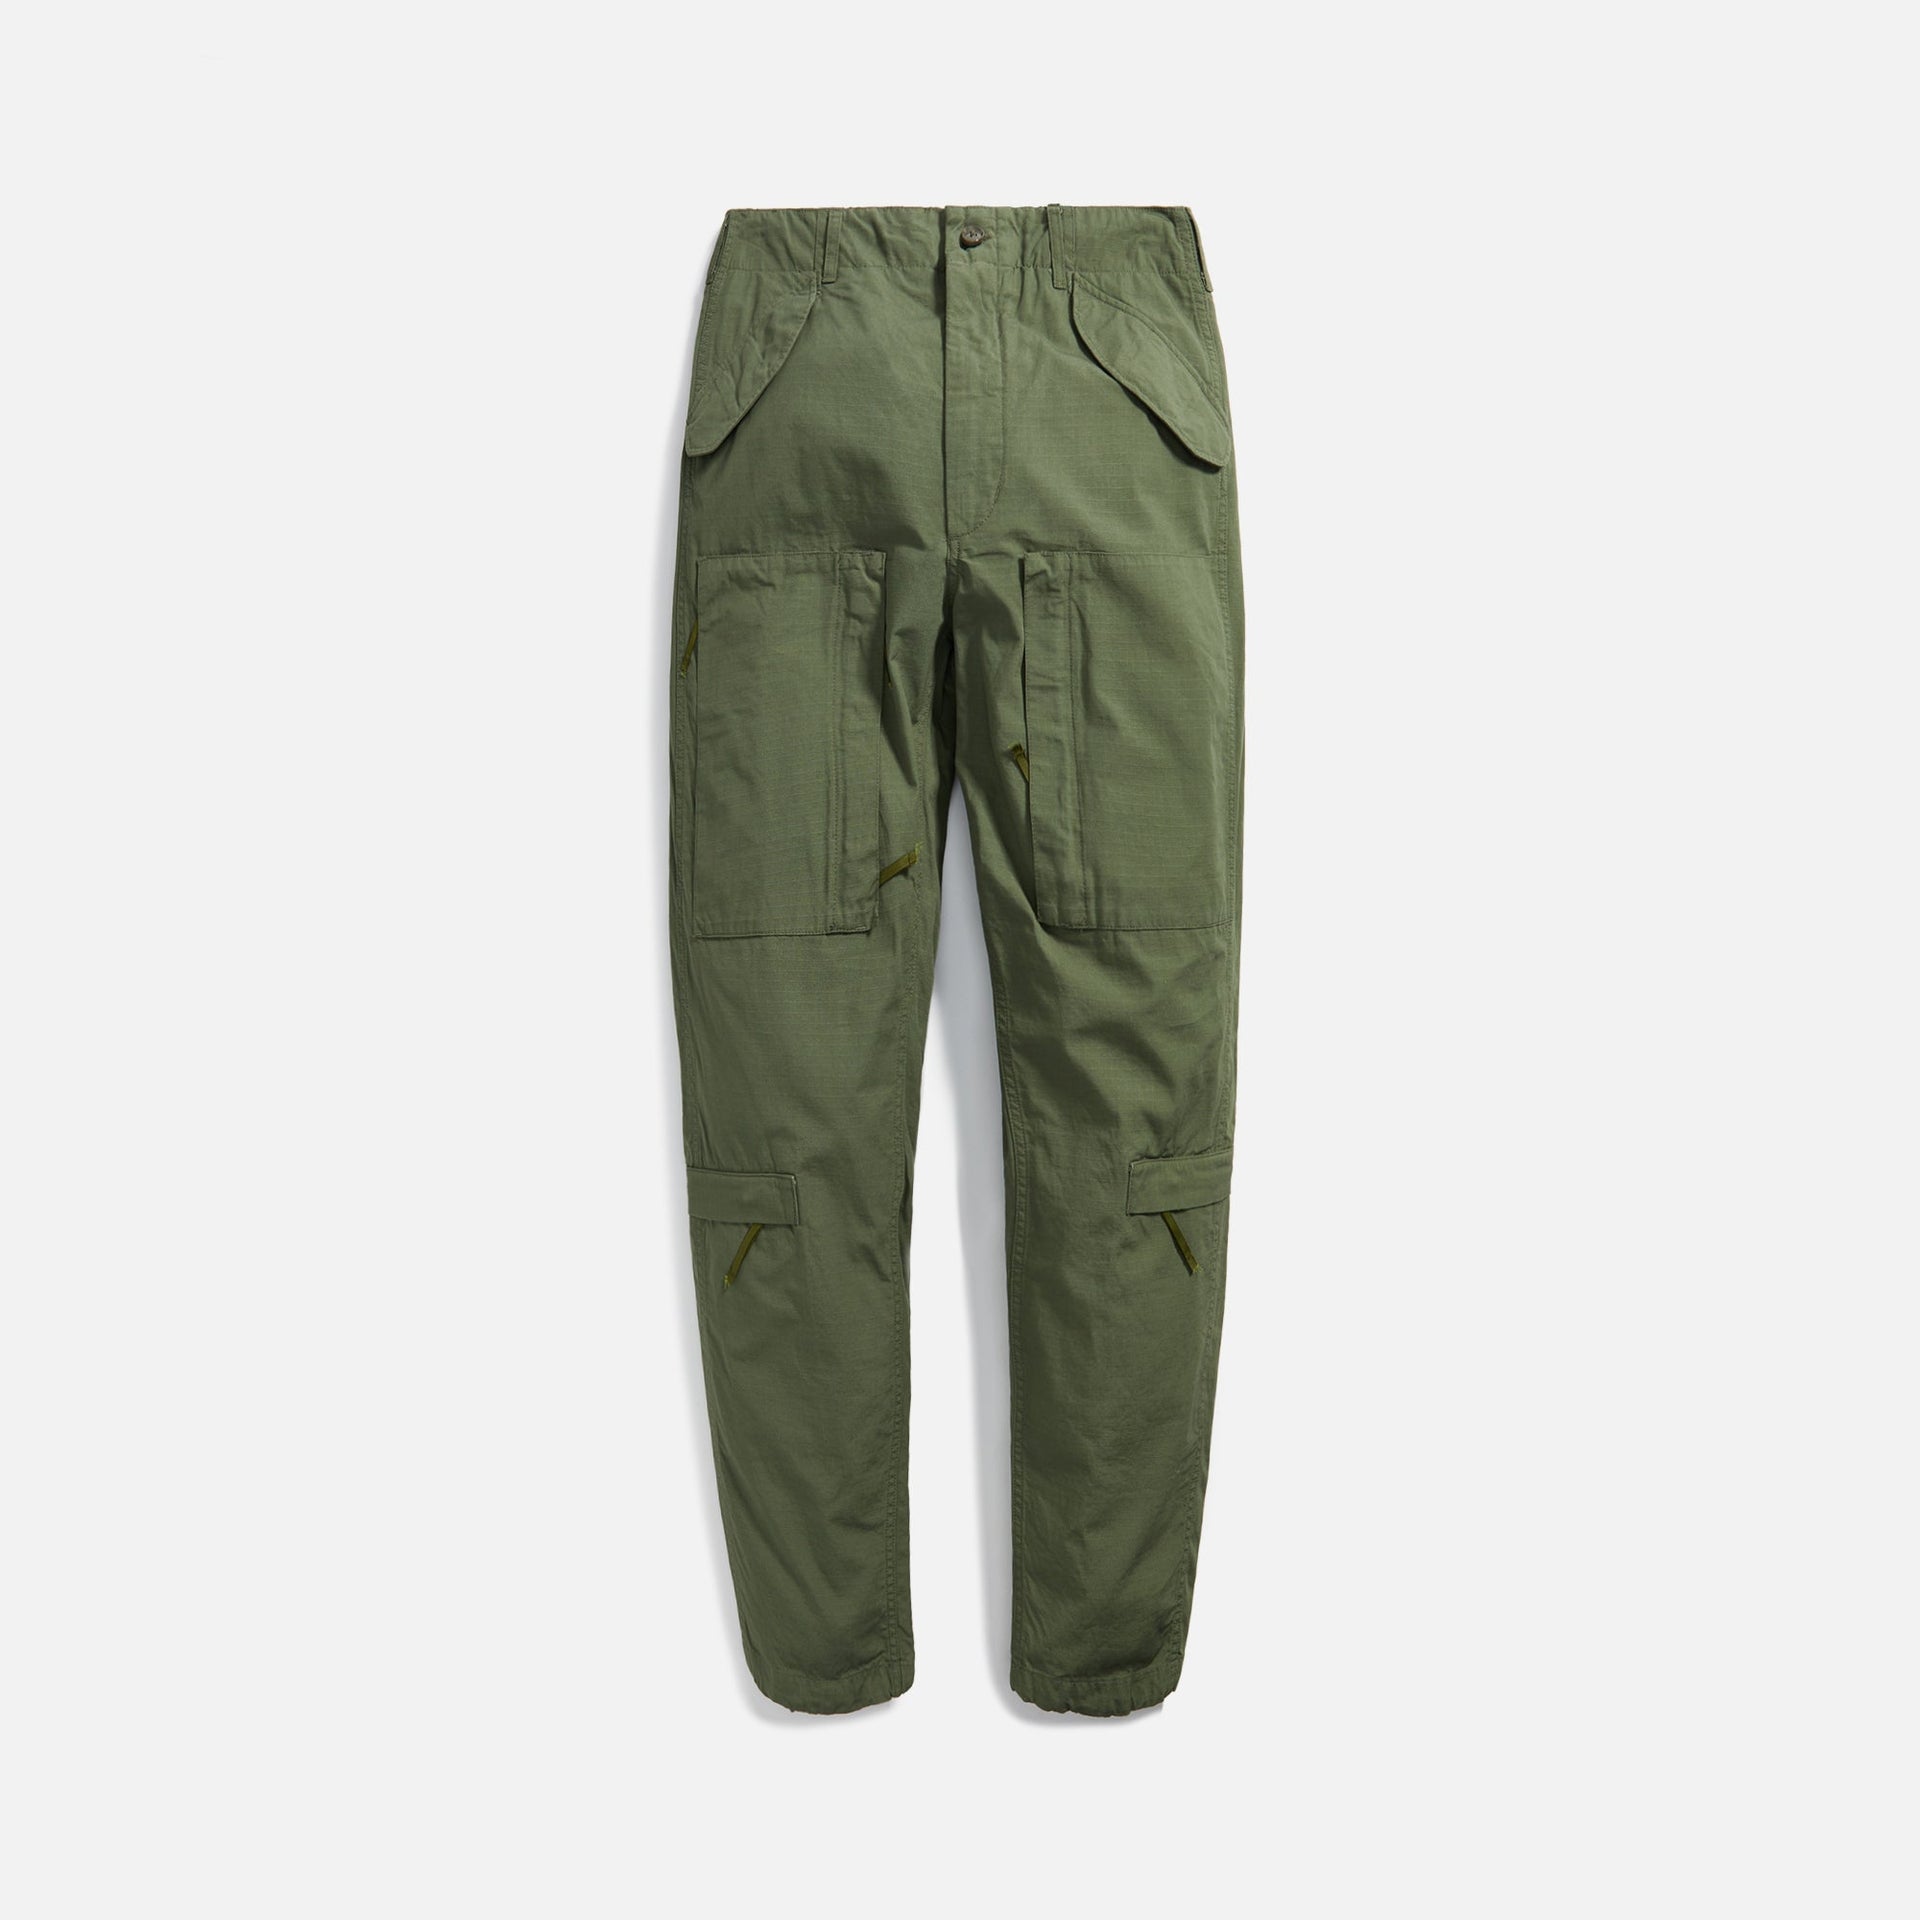 Engineered Garments Aircrew Pant Cotton Ripstop - Olive